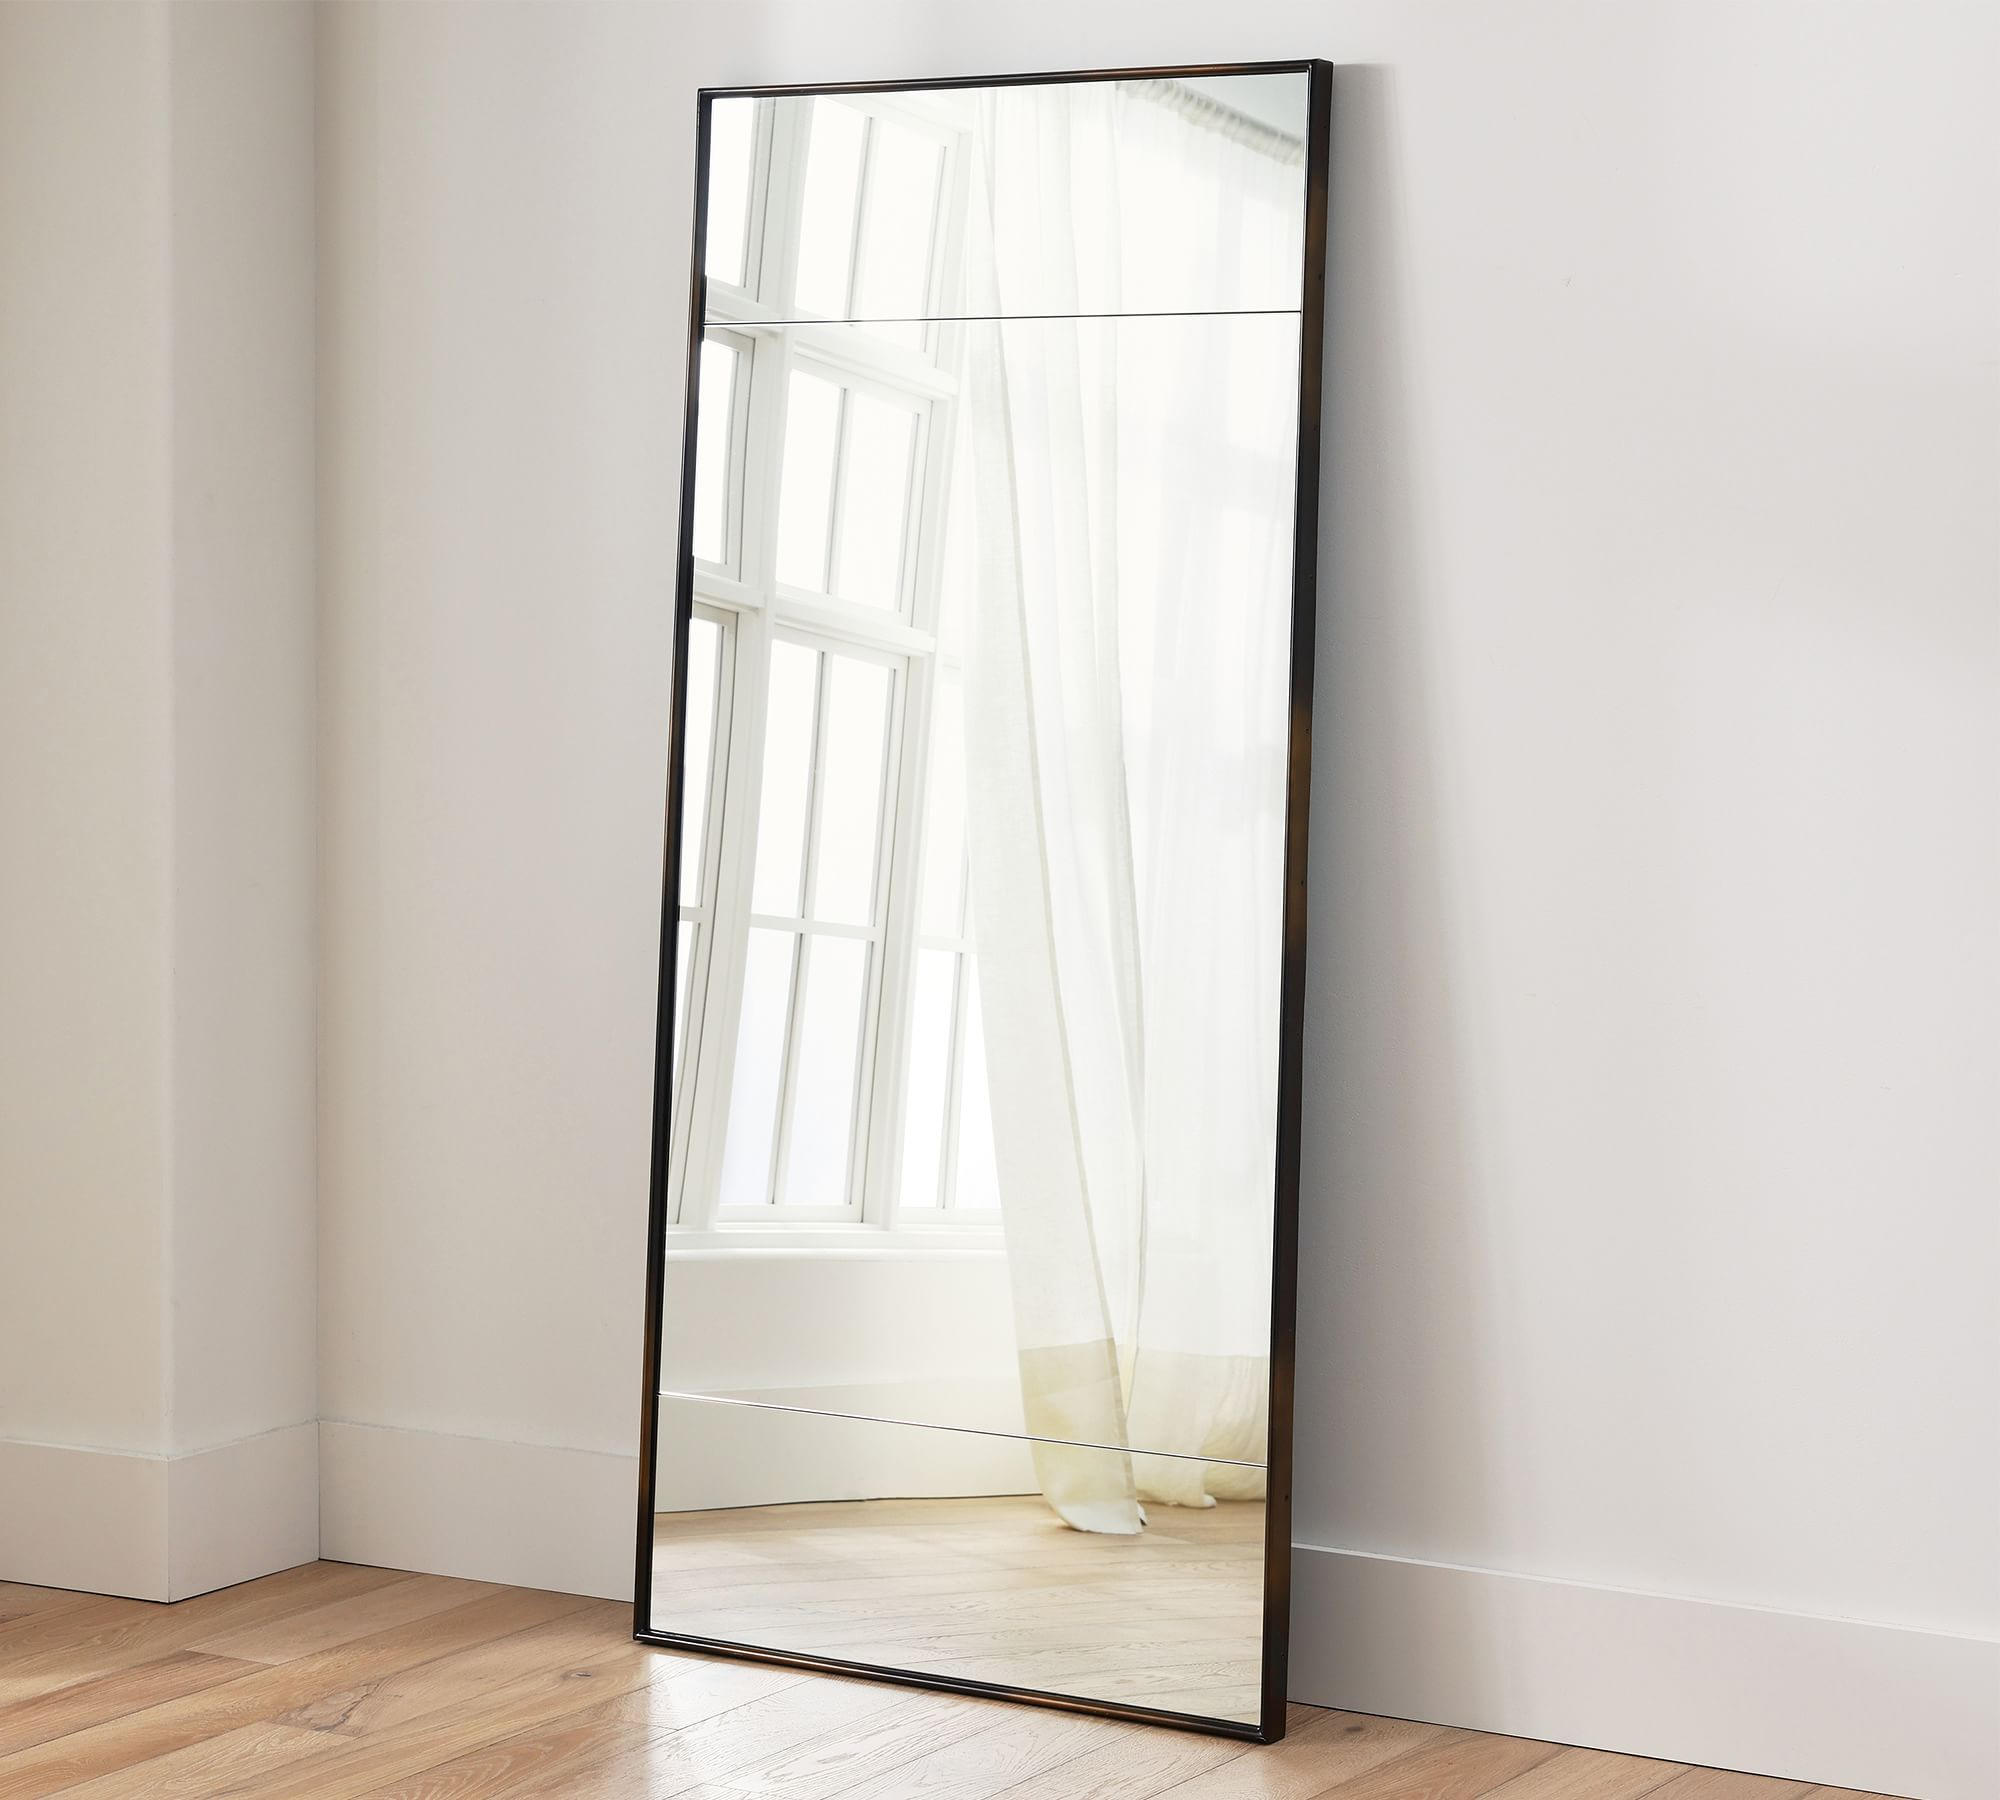 Berke Handcrafted Mirror Collection for men's bachelor pad